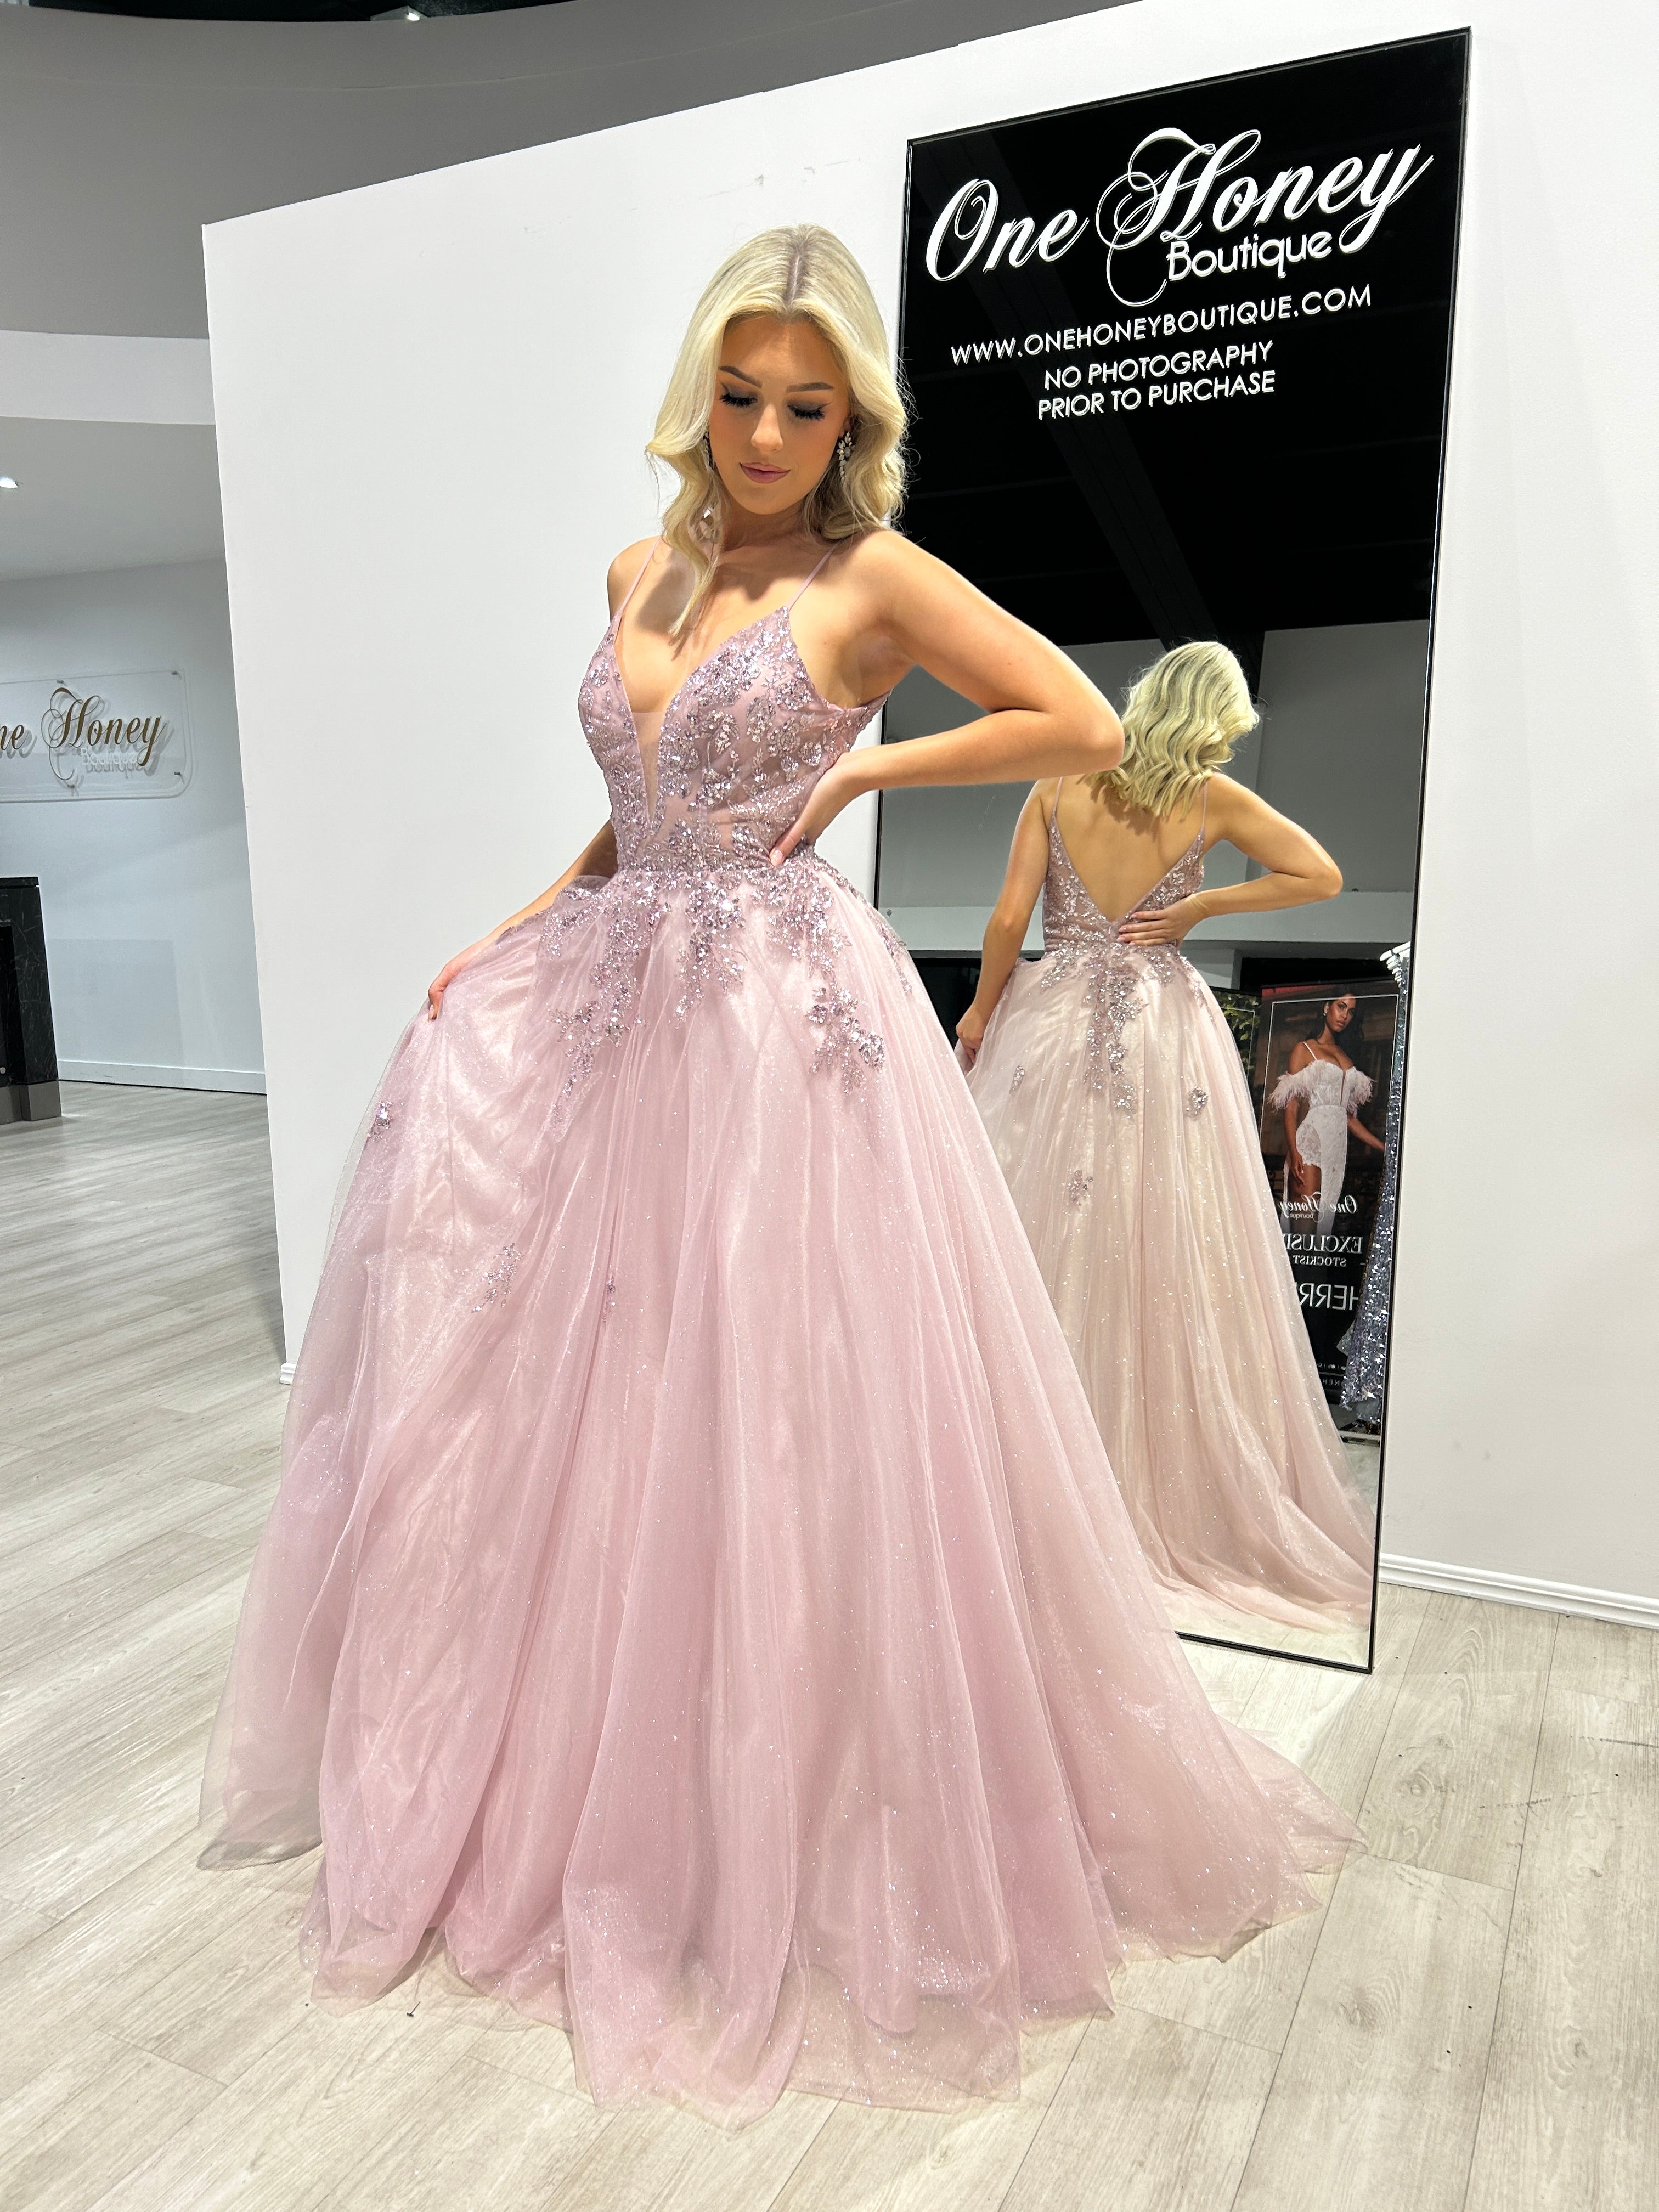 Honey Couture IRENA Dusty Rose Tulle Glitter A Line Formal Dress